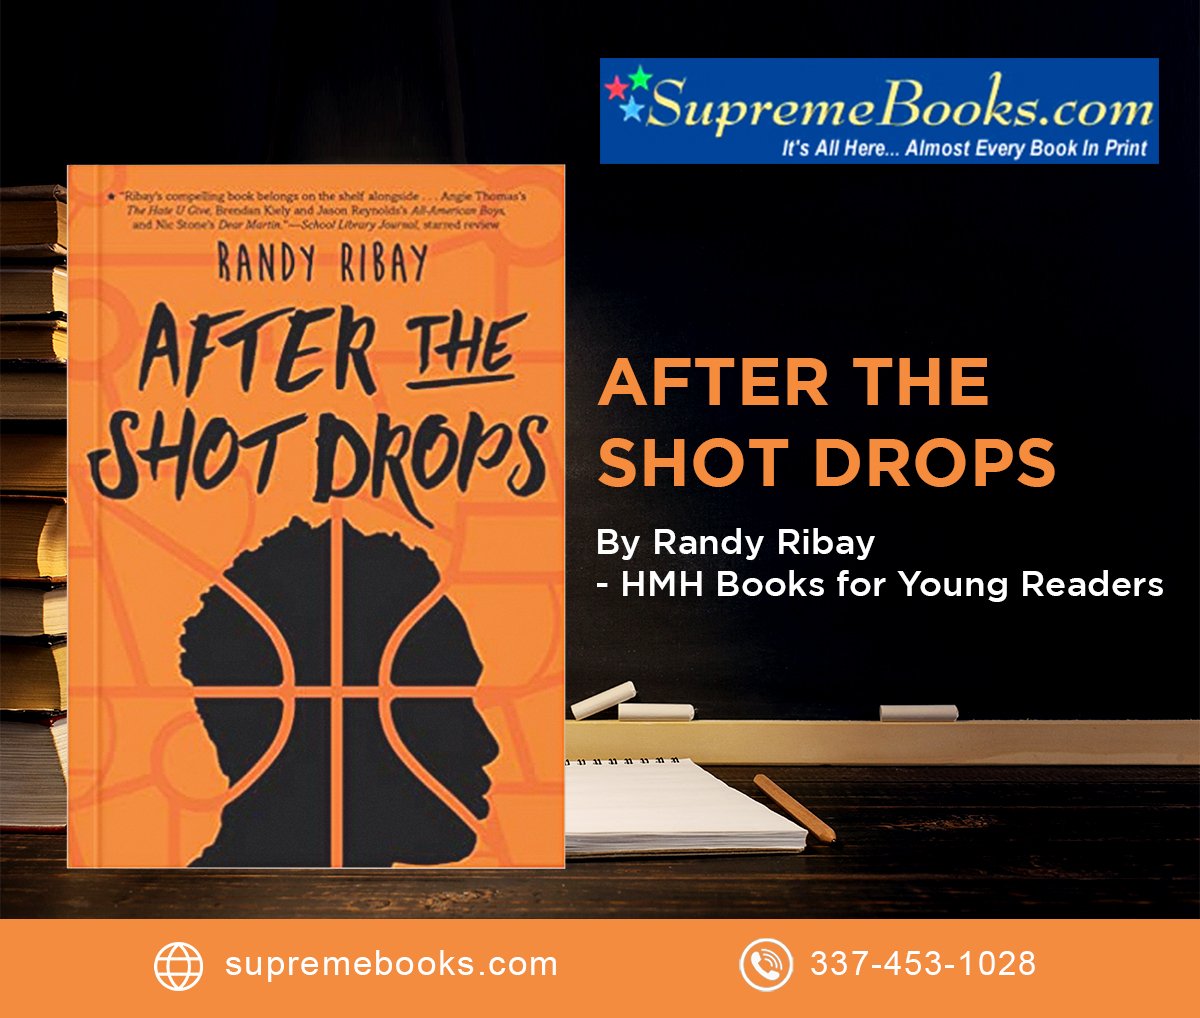 A powerful novel about friendship, basketball, and one teen's mission to create a better life for his family✨️
Available on Supremebooks.com 
Buy now 👇
AFTER THE SHOT DROPS supremebooks.com/ShowBookDetail…
.
.
.
#booksbooksbooks #readingcommunity #readerschoice #booksale